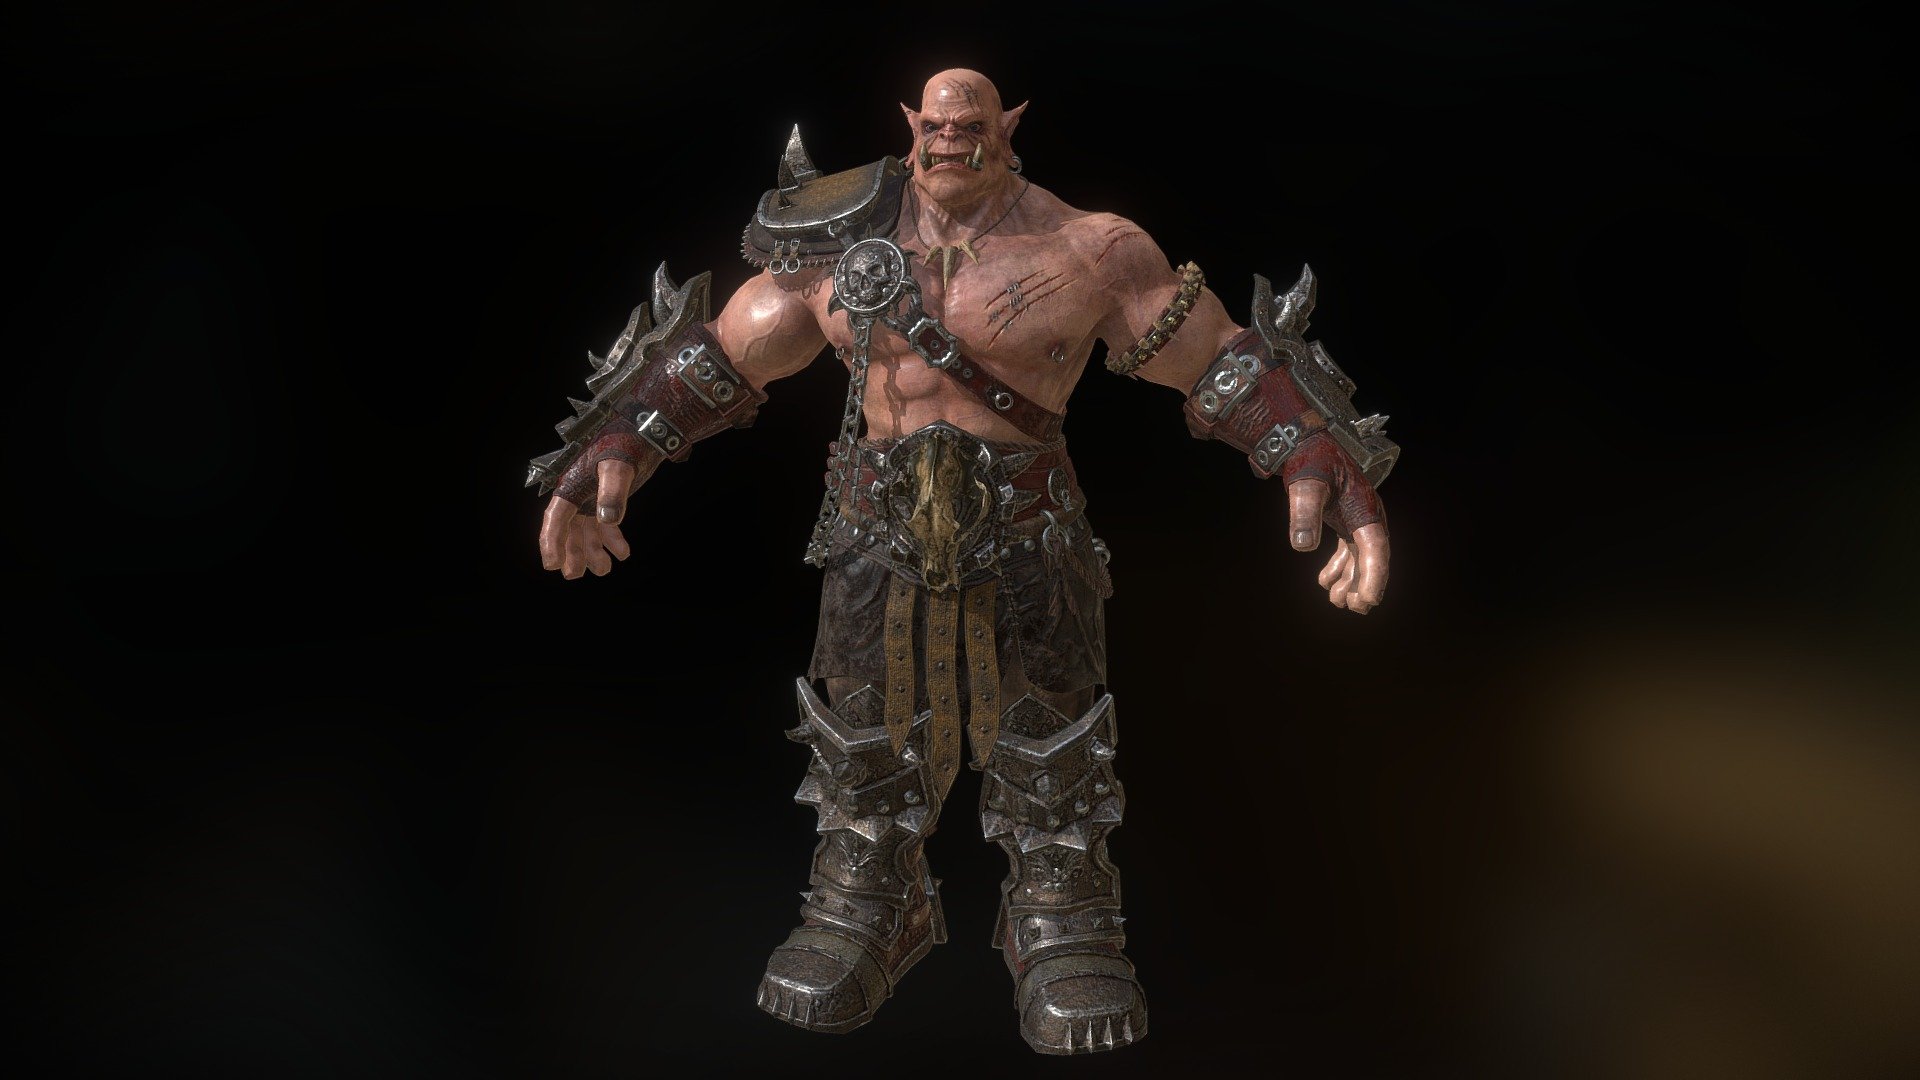 You may find more details here:
https://www.artstation.com/artwork/XZlXw - Warcraft Orc Warrior - 3D model by mikart3d 3d model